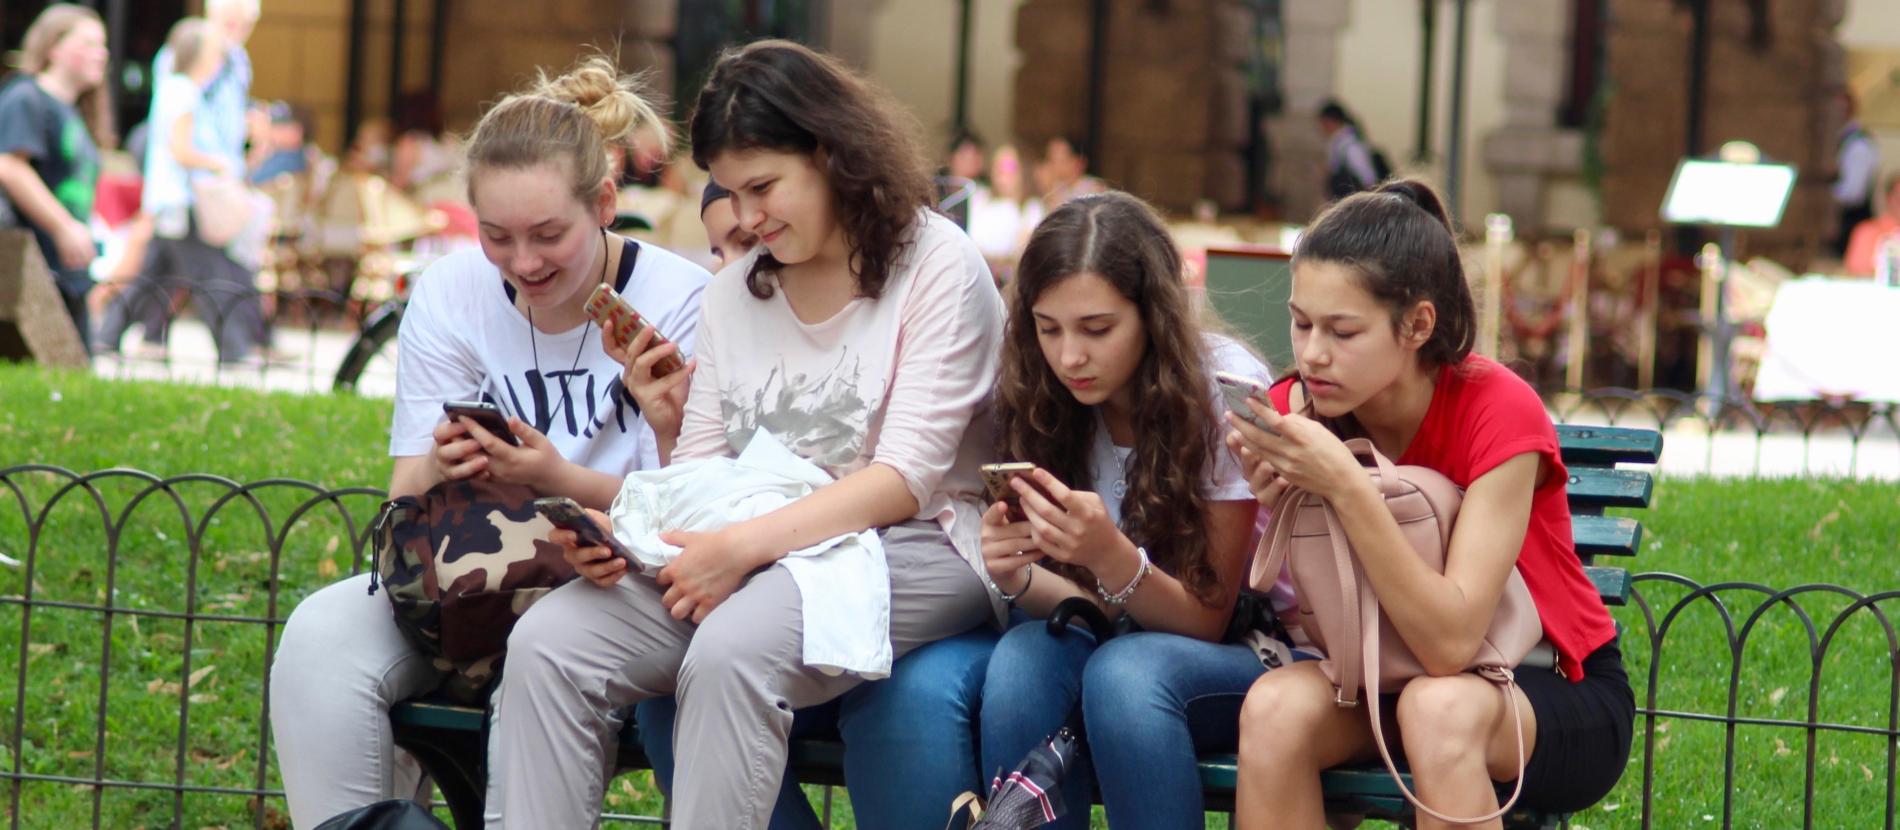 Tweens, Teens, and Phones: What Our 2019 Research Reveals